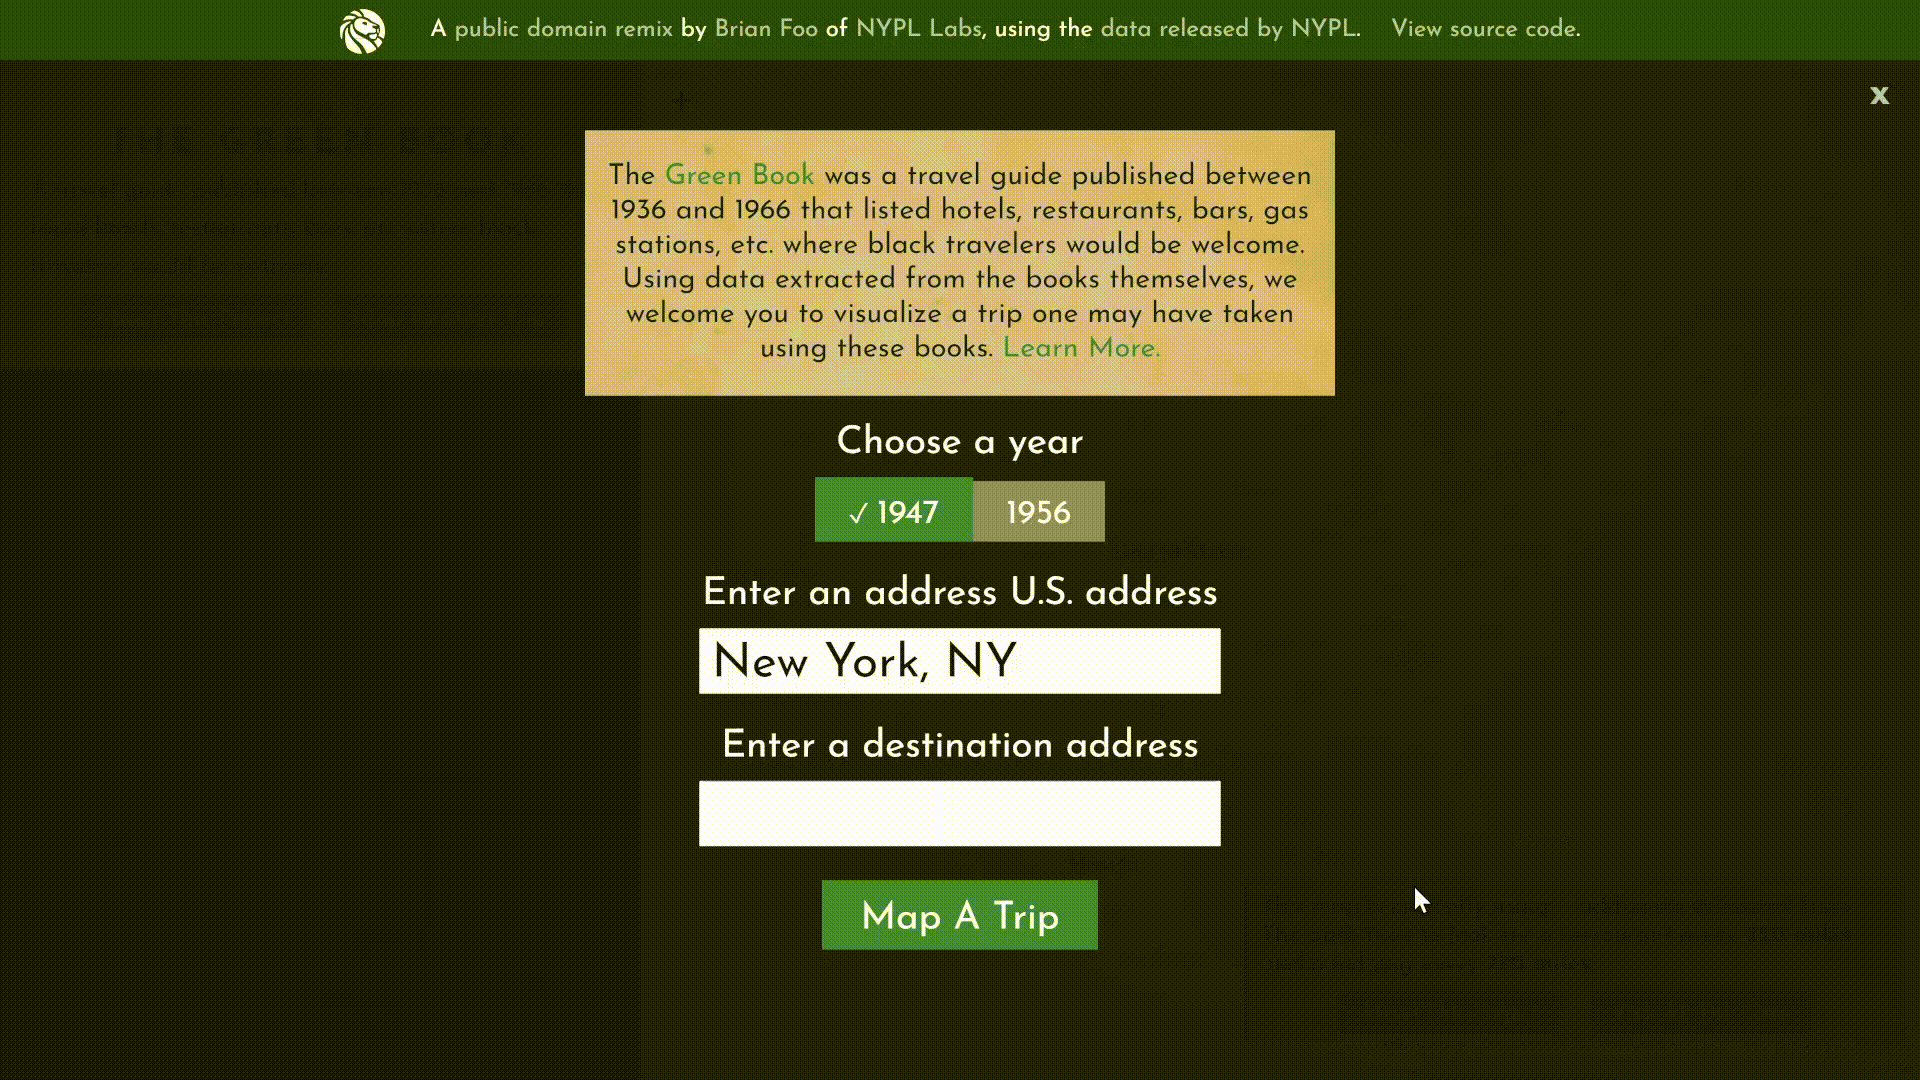 Website map a trip button becomes unclickable after mistyped address and "x" button does not work